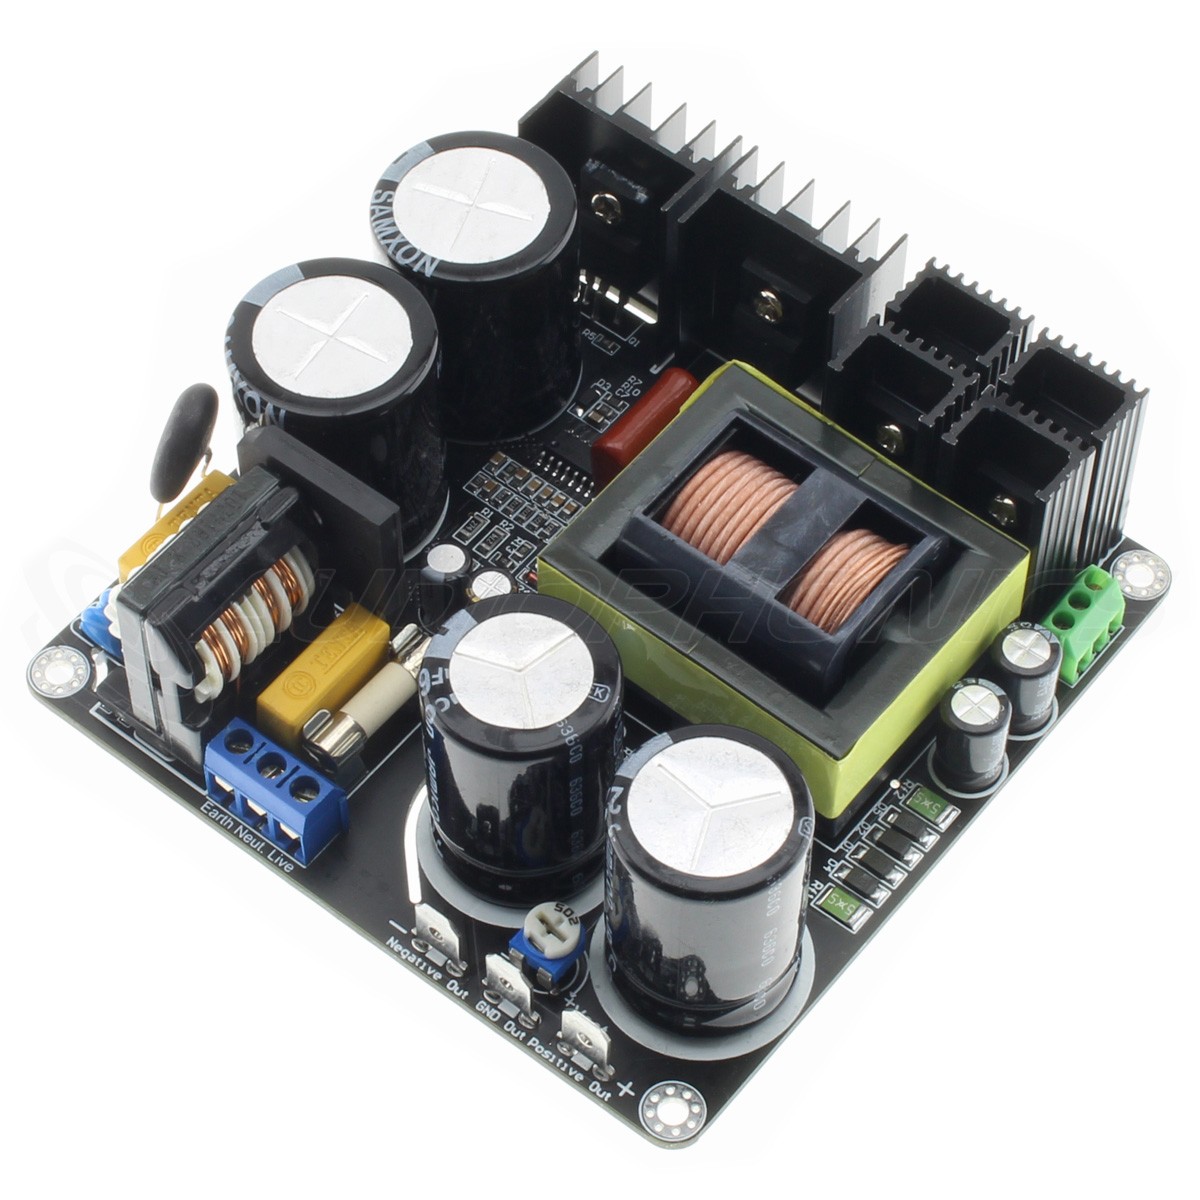 SMPS500R Power supply Module 500W +/-55V